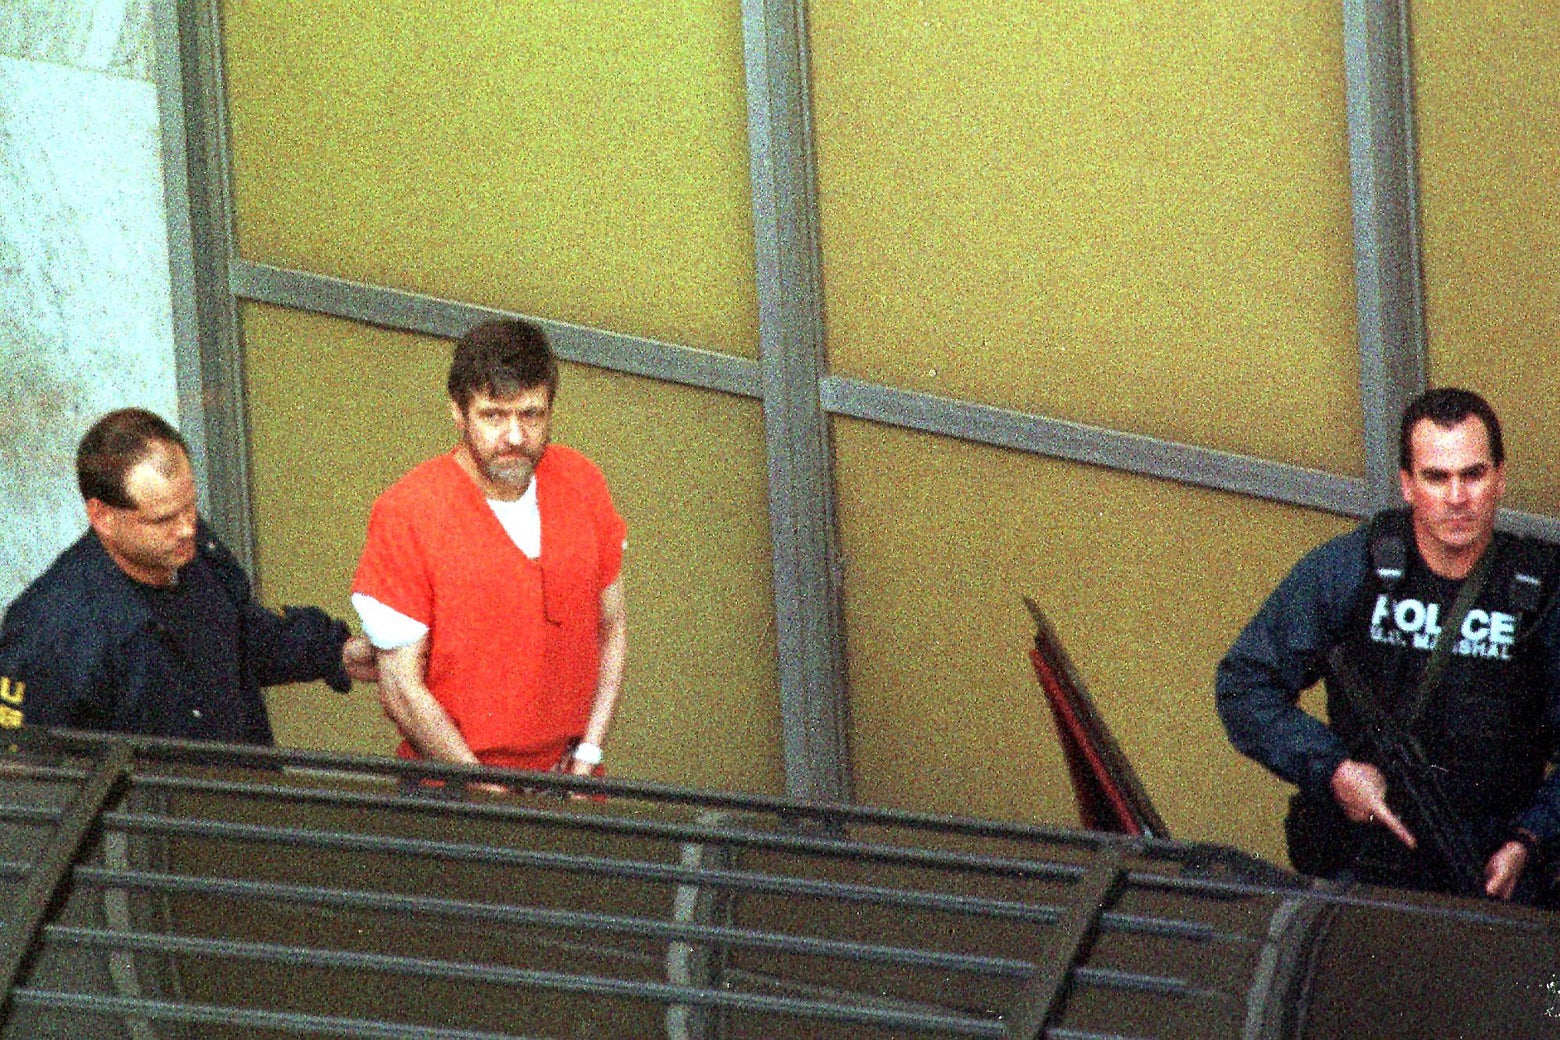 Theodore Kaczynski is led out by U.S. Marshals in Sacramento, California, after admitting to being the Unabomber.